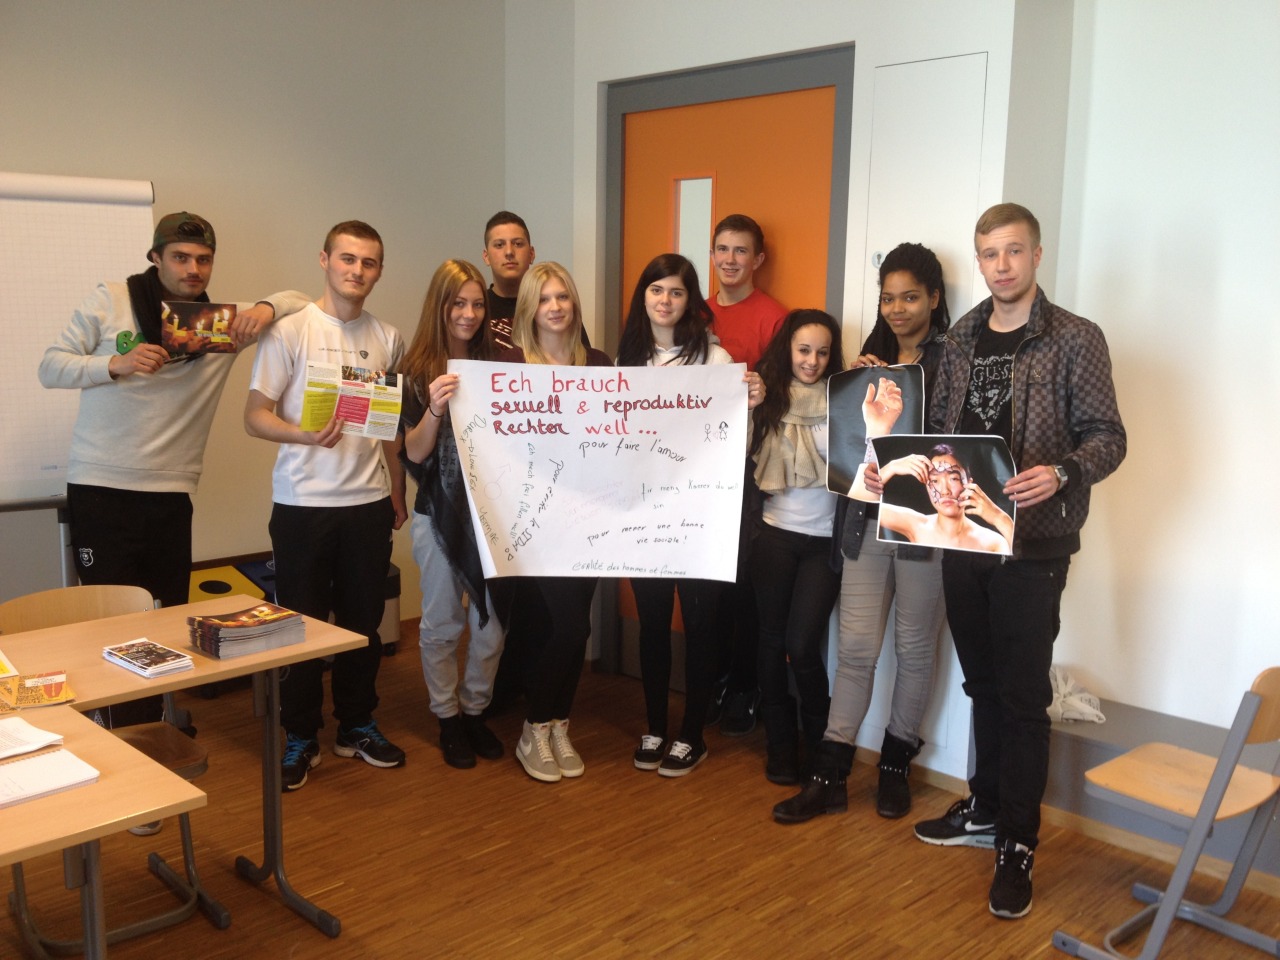 After a HRE workshop, students from Luxembourg (LTPES) explain why they need sexual and reproductive rights, March 2014.